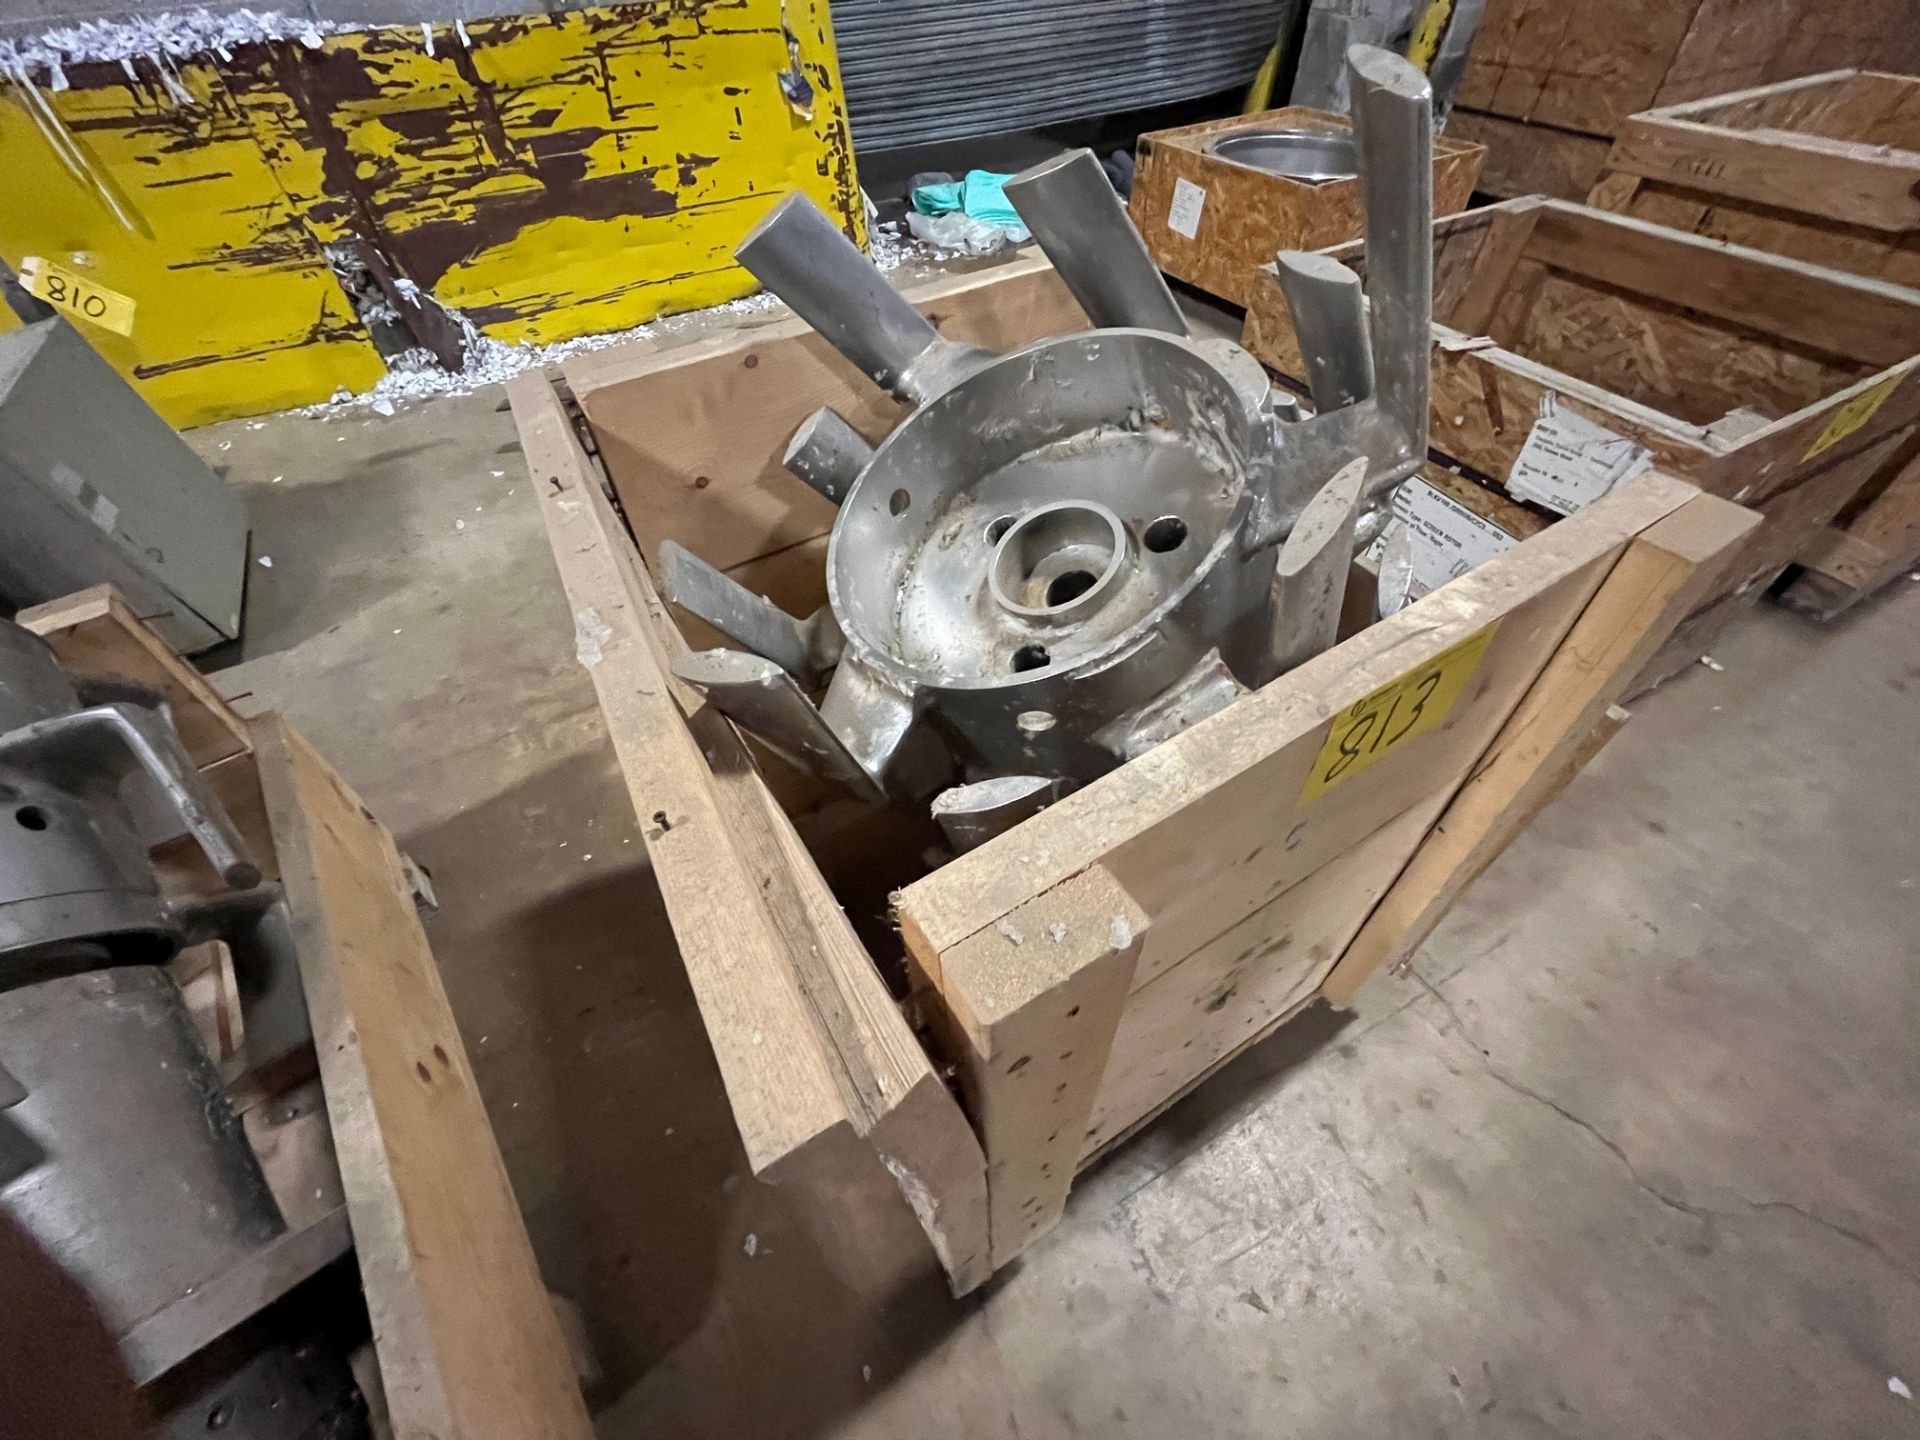 STAINLESS STEEL ROTARY ATTACHMENT IN CRATE (DEINKING BUILDING)